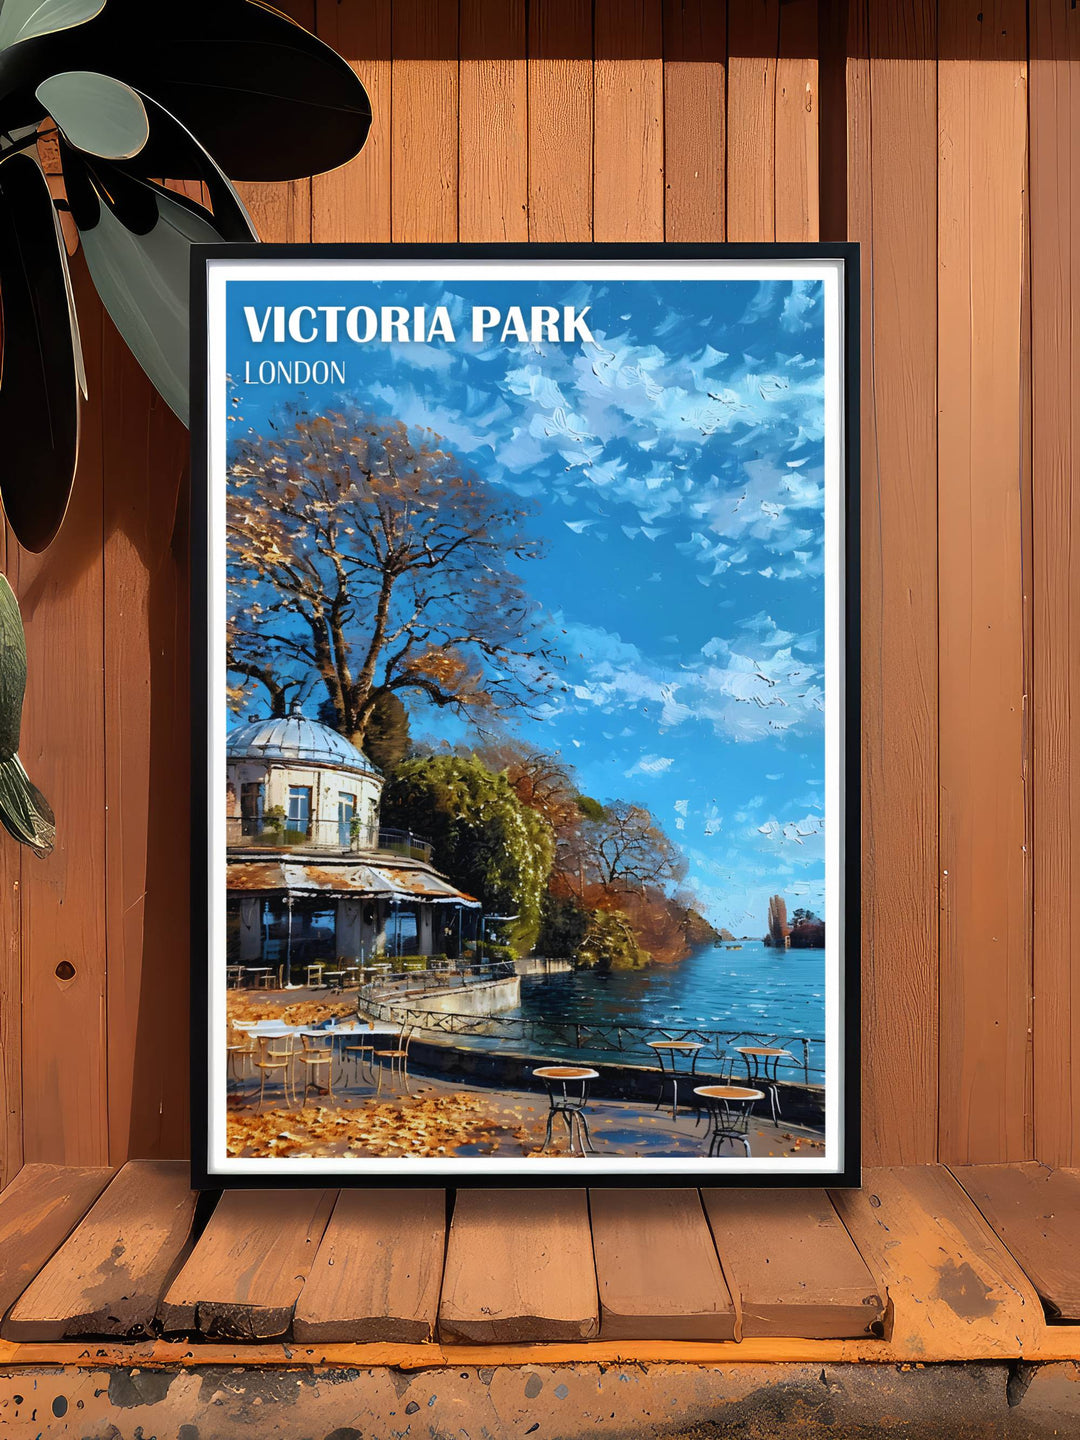 Travel poster of Victoria Park featuring the Pavilion Café, bringing the charm and tranquility of this iconic park into your home.